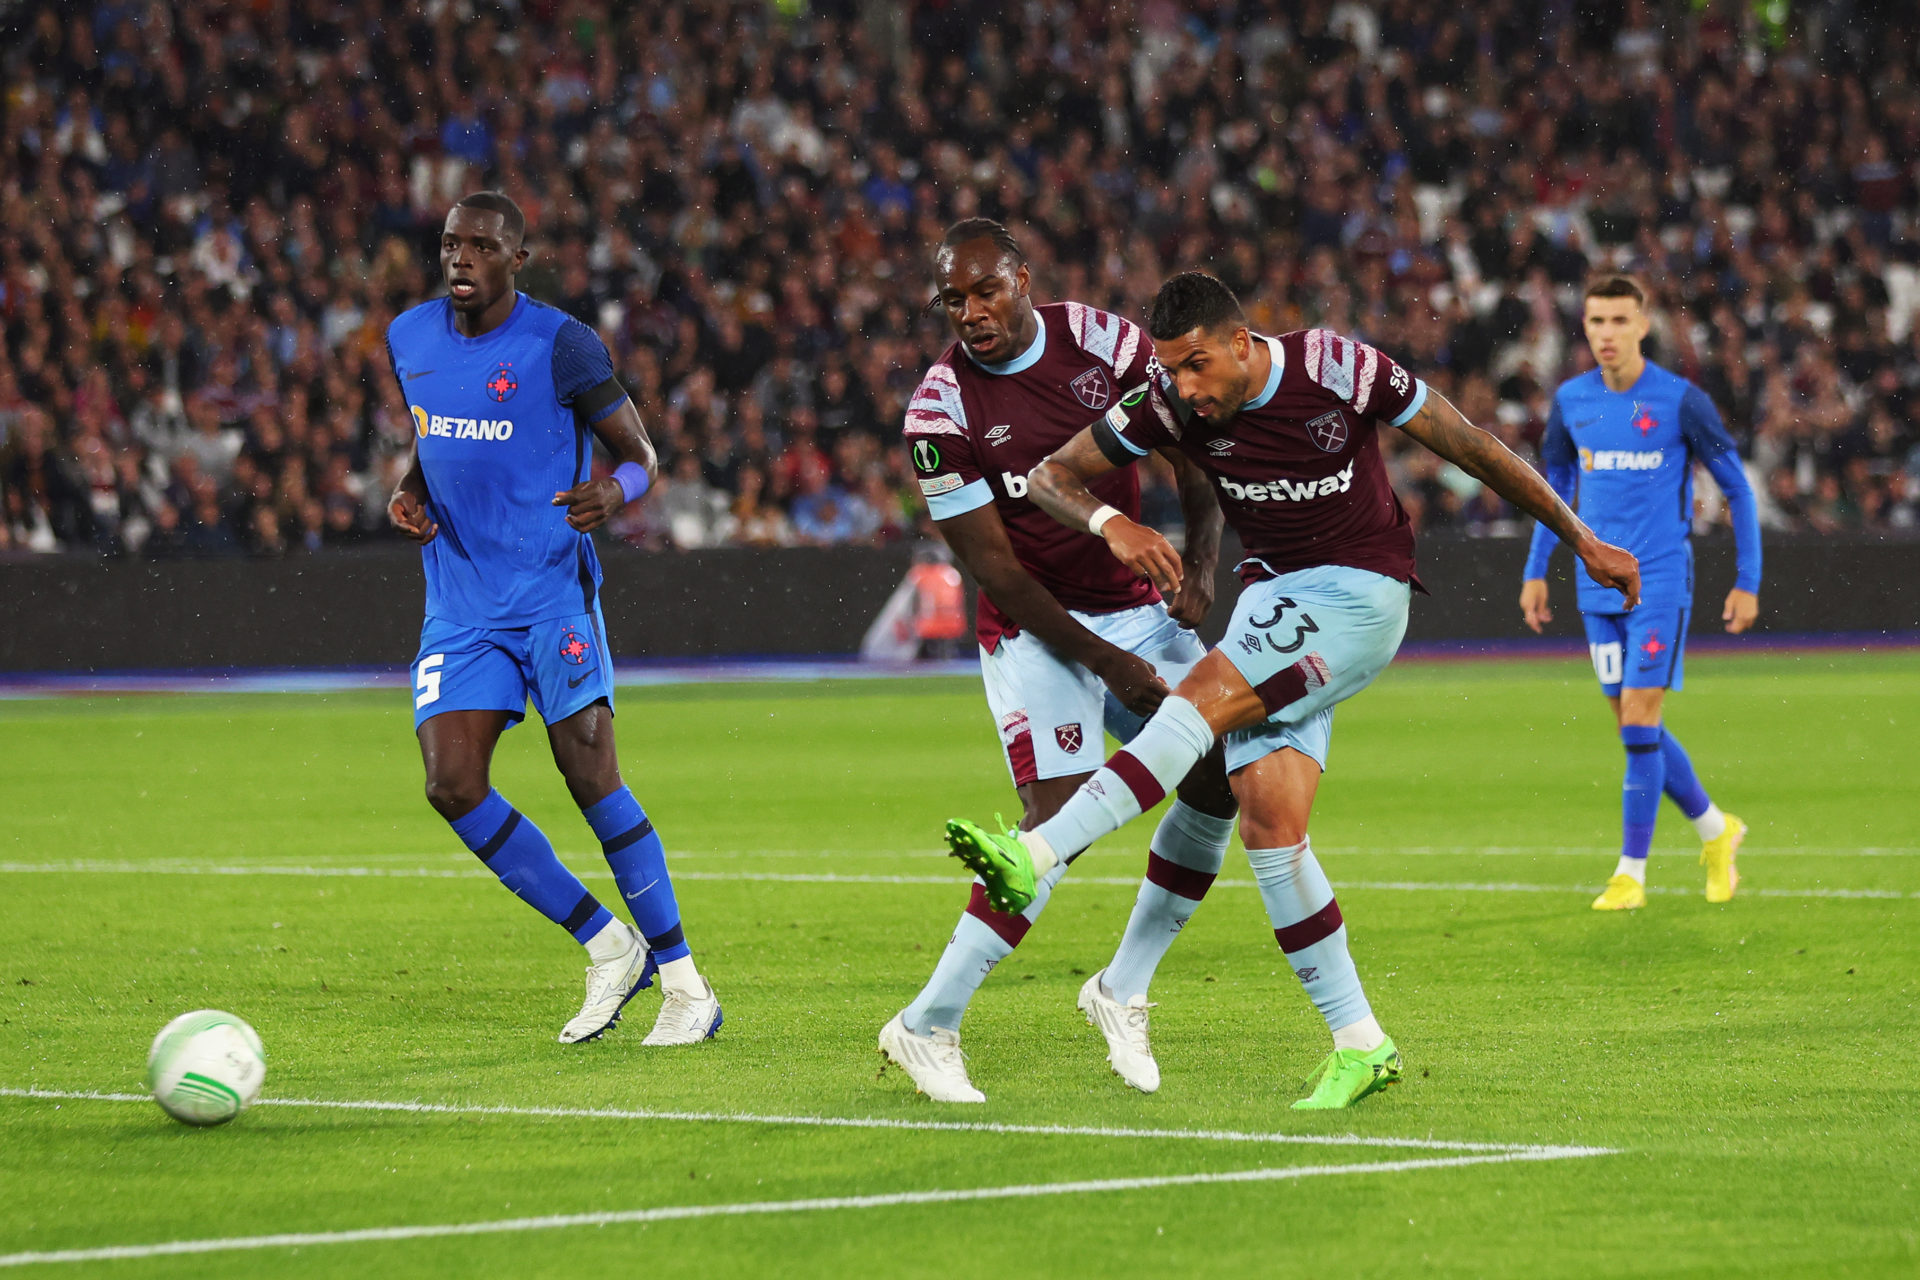 ‘So much quality’: Emerson names six West Ham stars he loves playing alongside